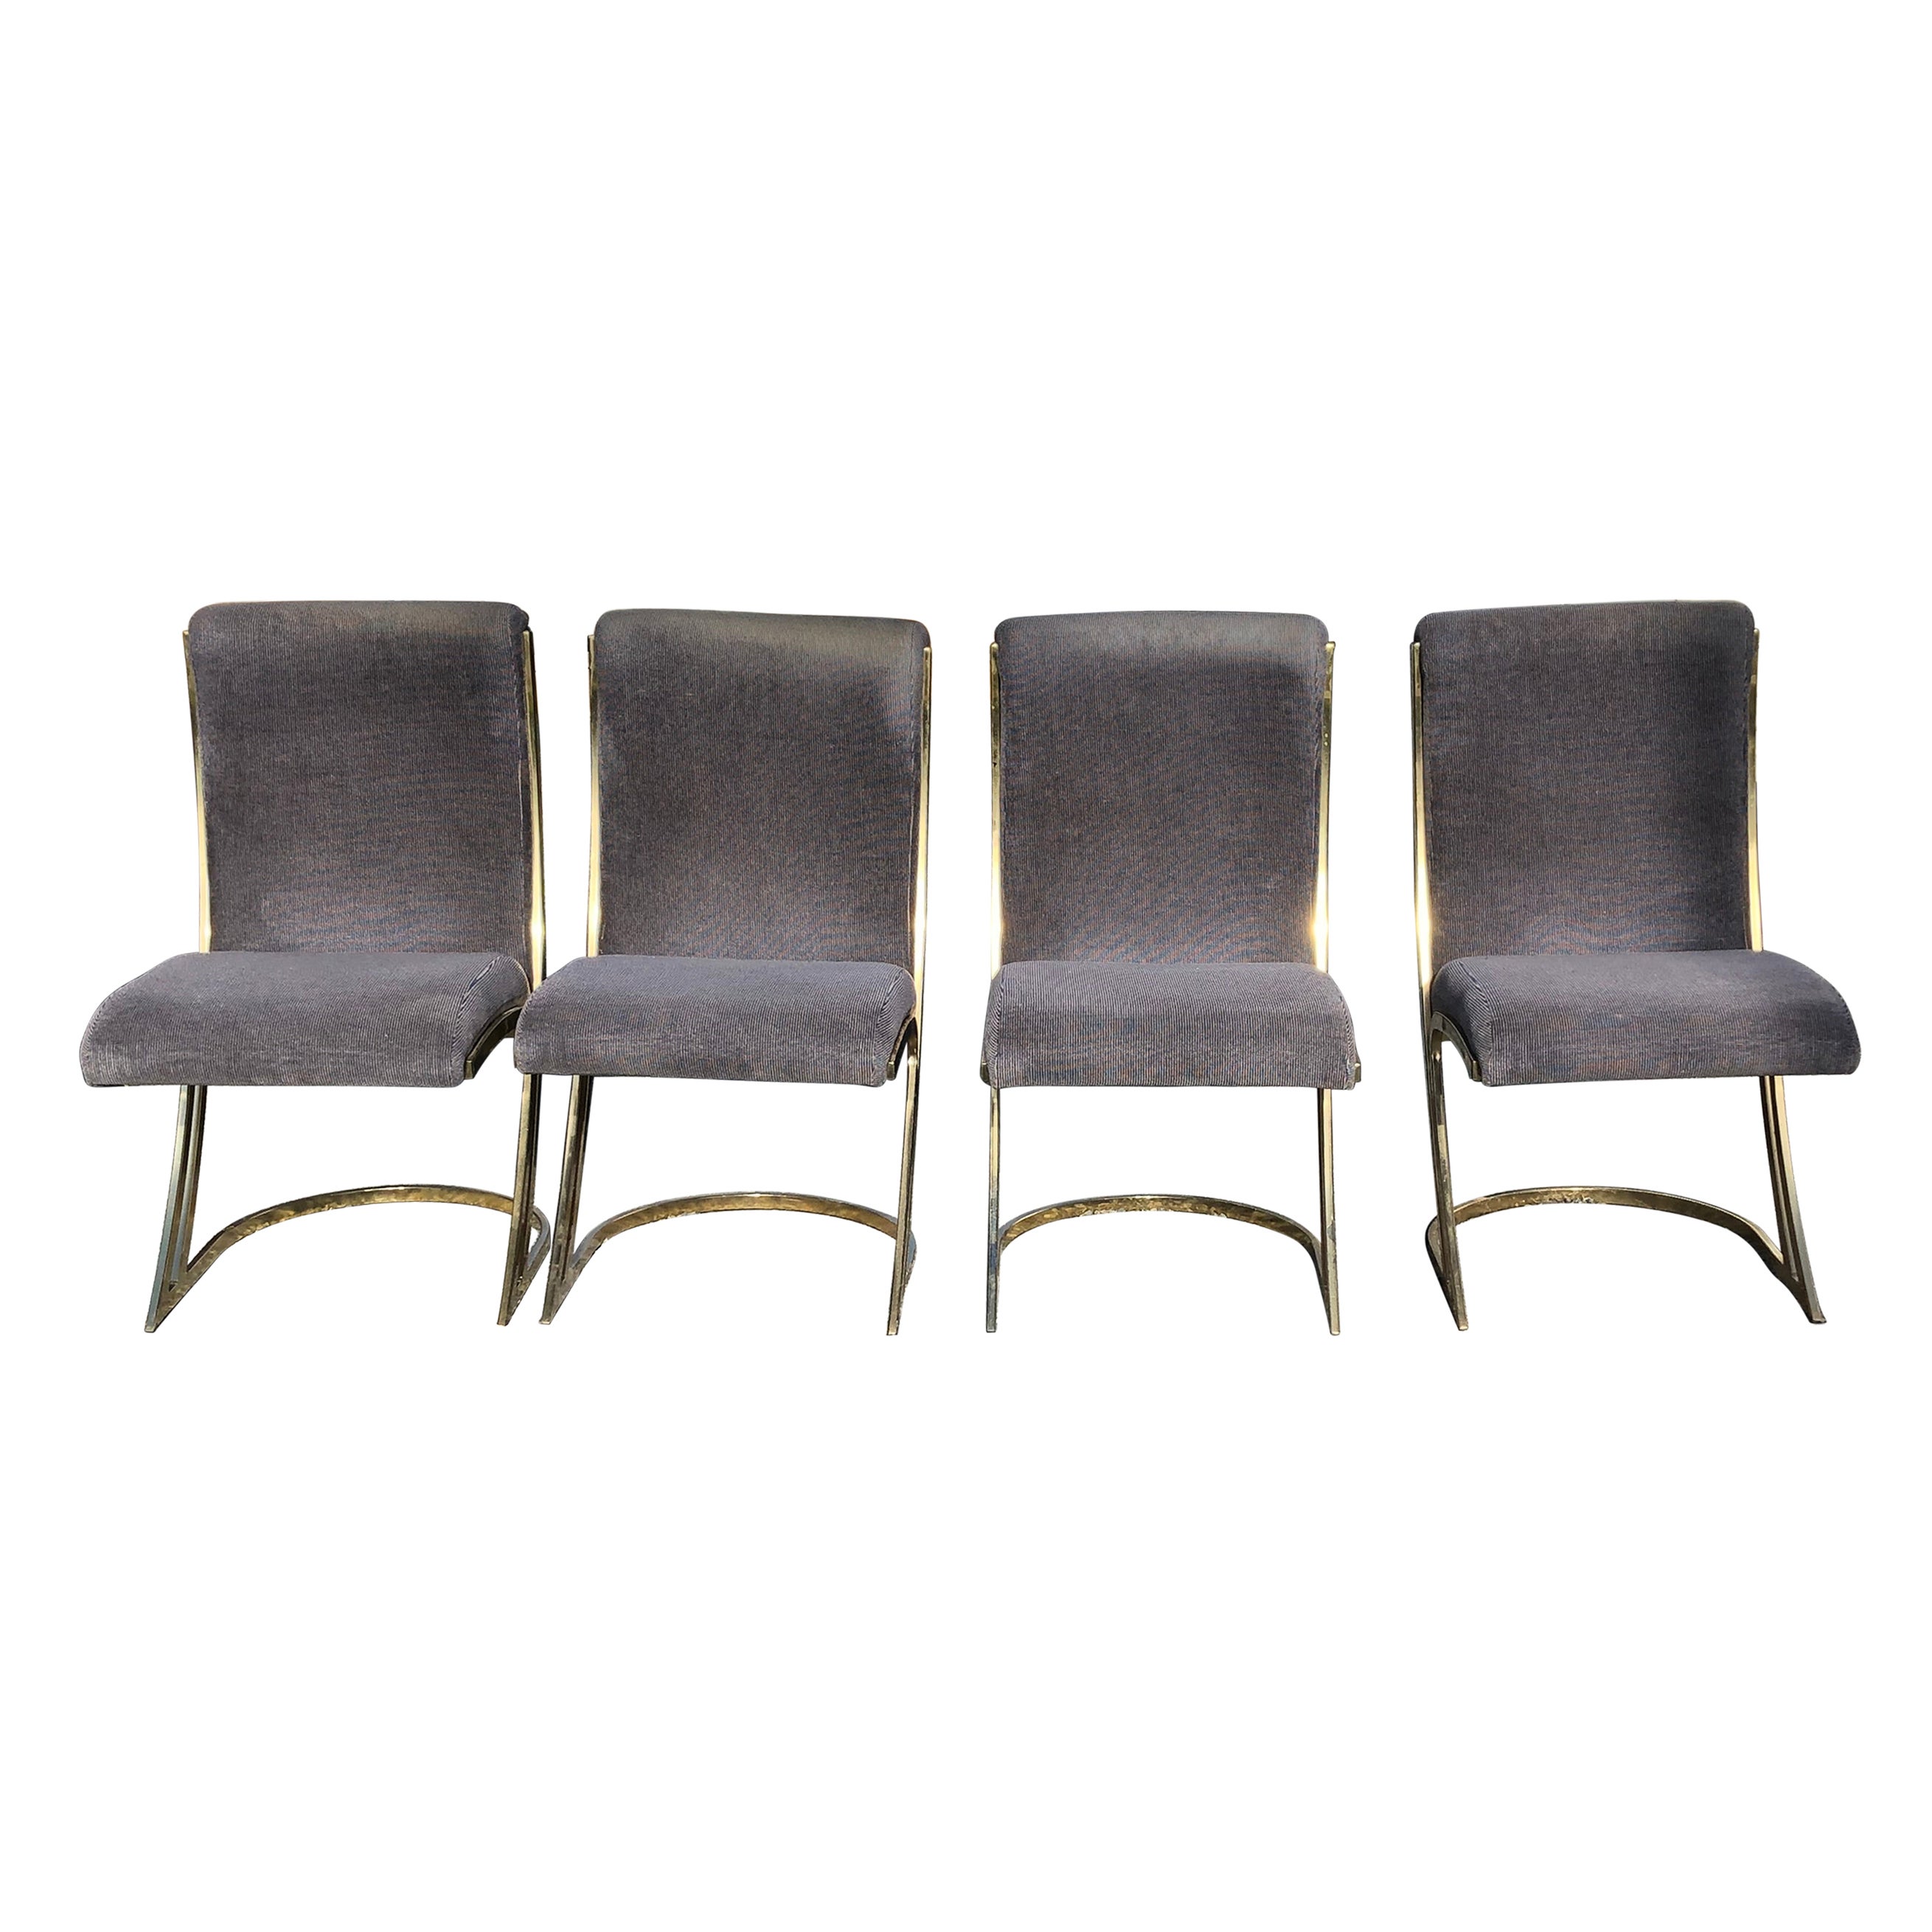 Super Cool Set of 4 Mid-Century Modern Brass and Upholstered Dining Chairs